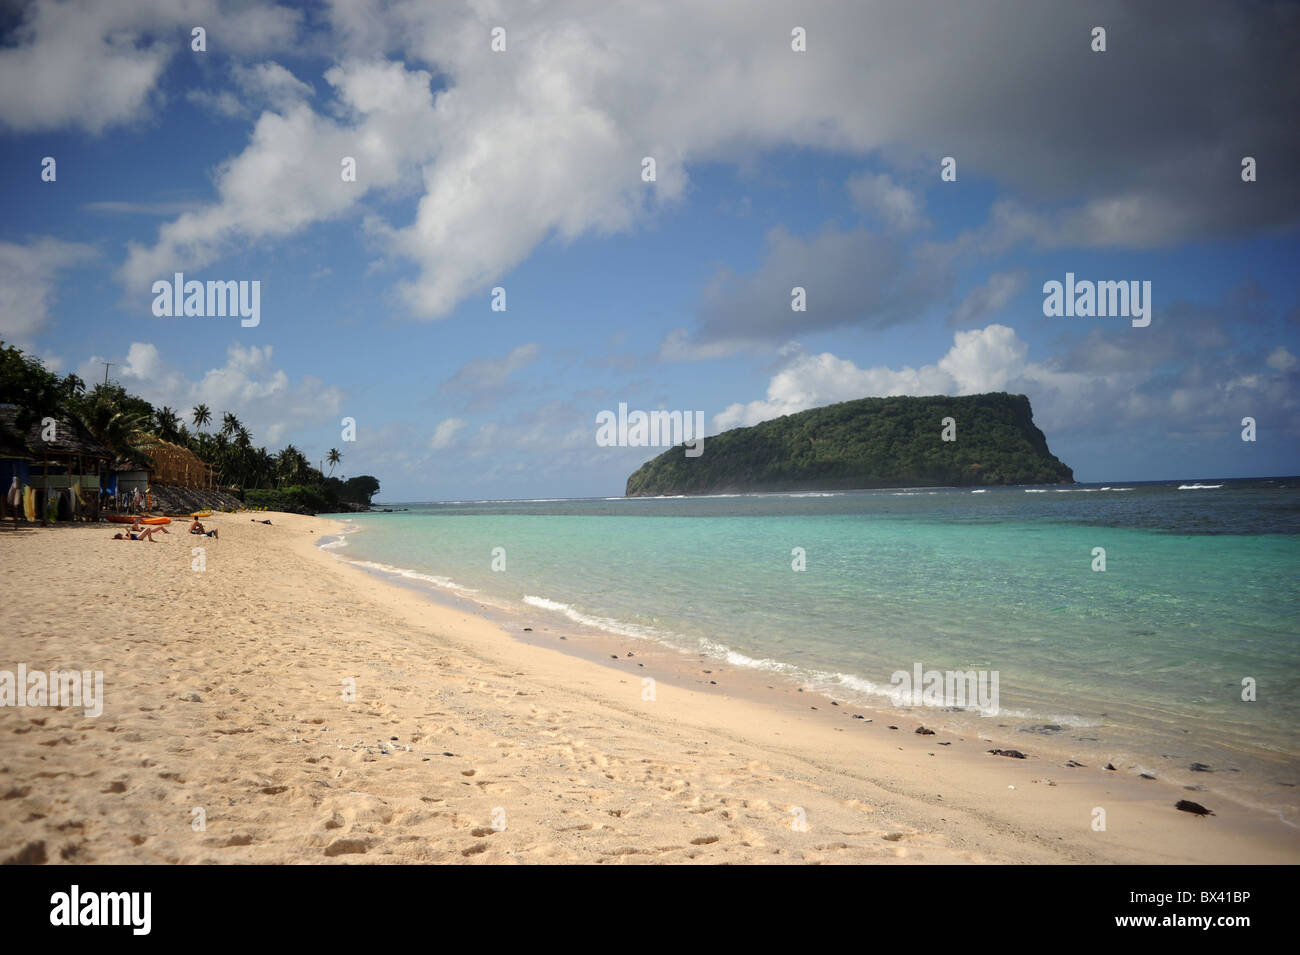 View from the Taufua Fales, Lalomanu, Western Samoa Stock Photo